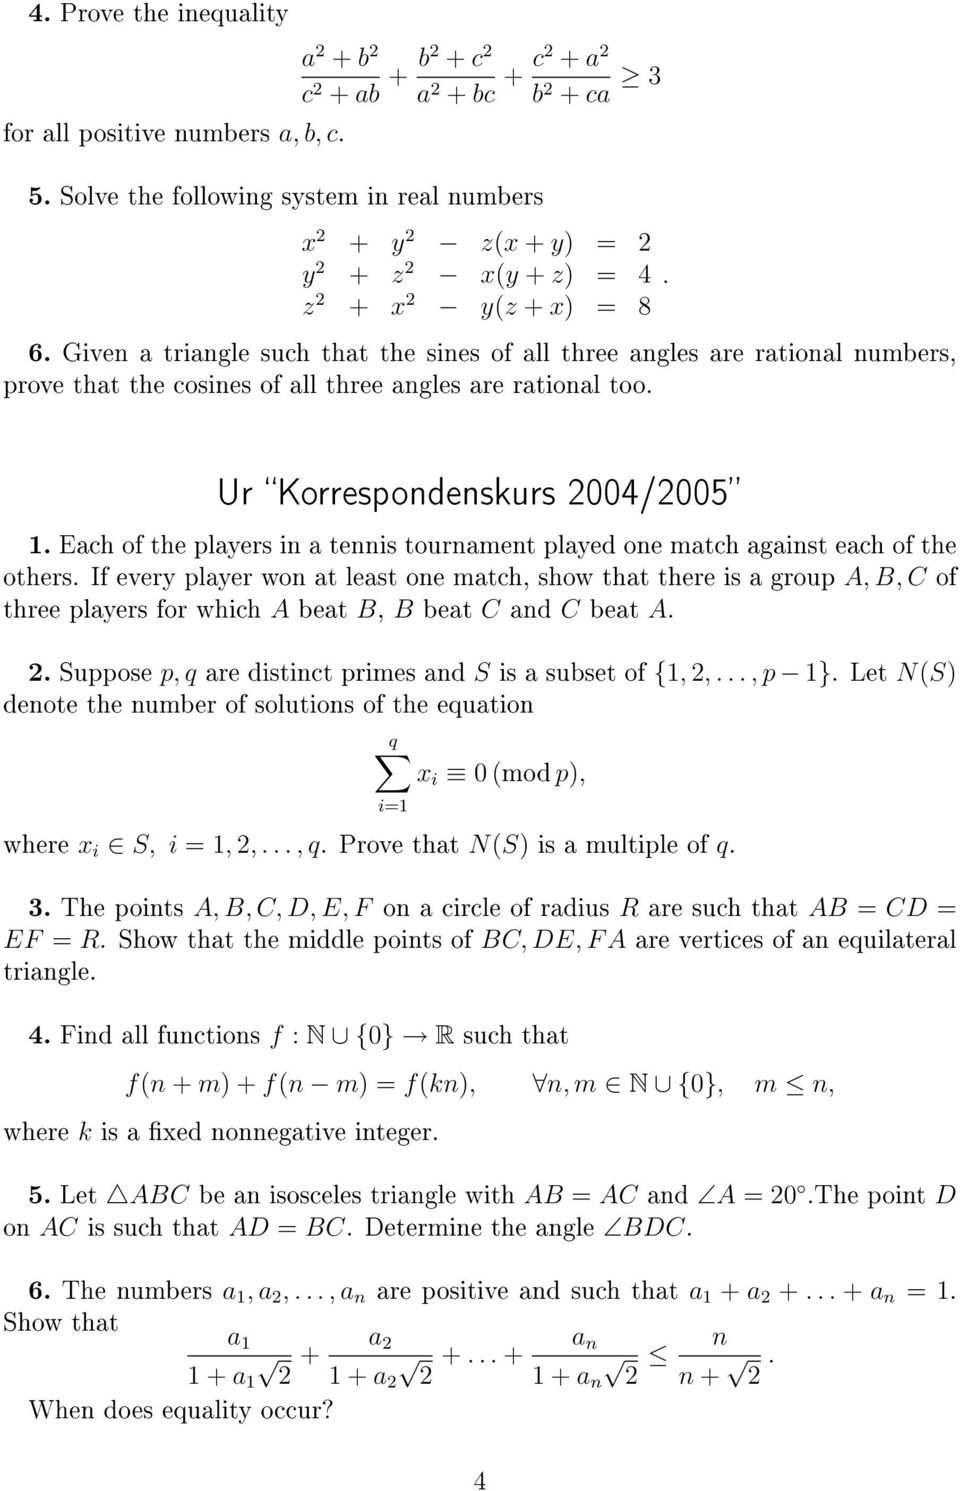 Given a triangle such that the sines of all three angles are rational numbers, prove that the cosines of all three angles are rational too.. Ur Korrespondenskurs 2004/2005.